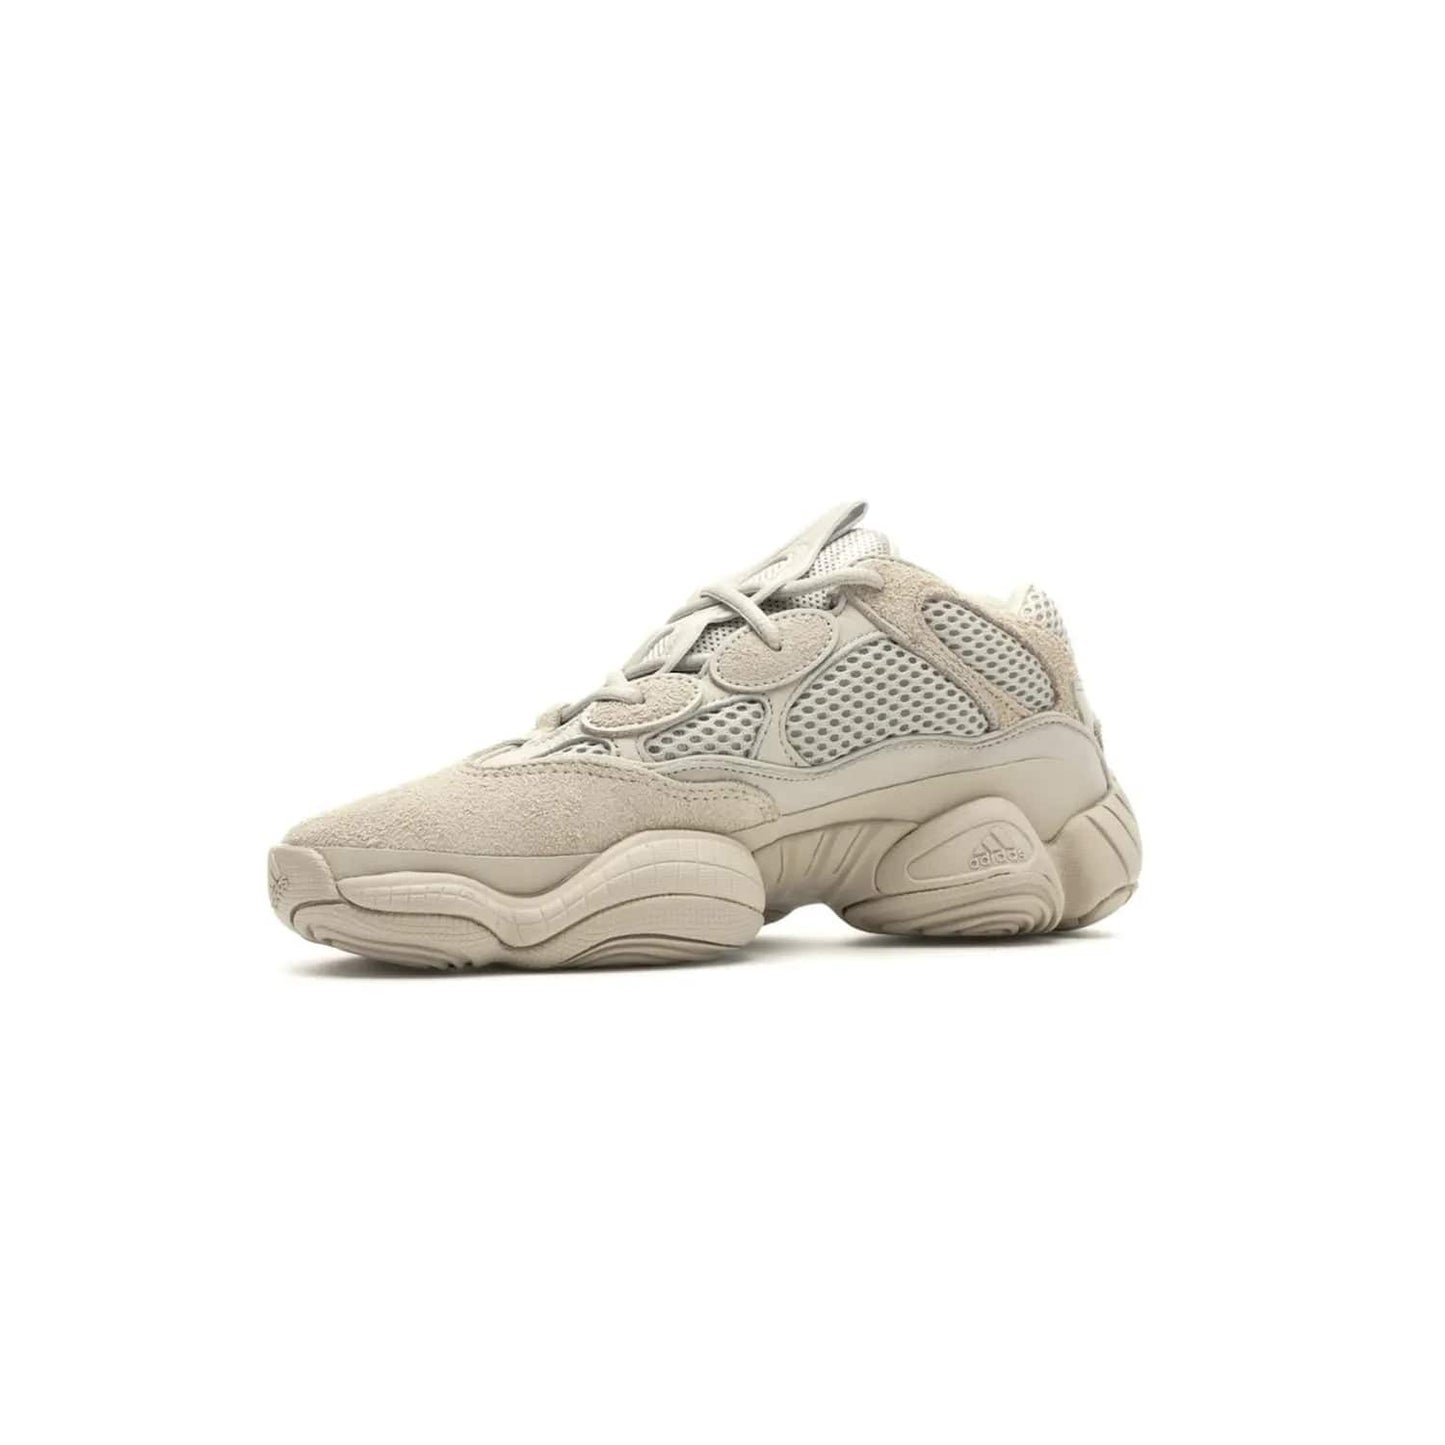 adidas Yeezy 500 Blush - Image 16 - Only at www.BallersClubKickz.com - Step up your sneaker game with the Adidas Yeezy 500 Blush. Monochromatic pale pink palette, hiking-inspired suede/mesh construction, plus adiPRENE sole for comfort and performance. Get the Adidas Yeezy 500 and experience true style and comfort.